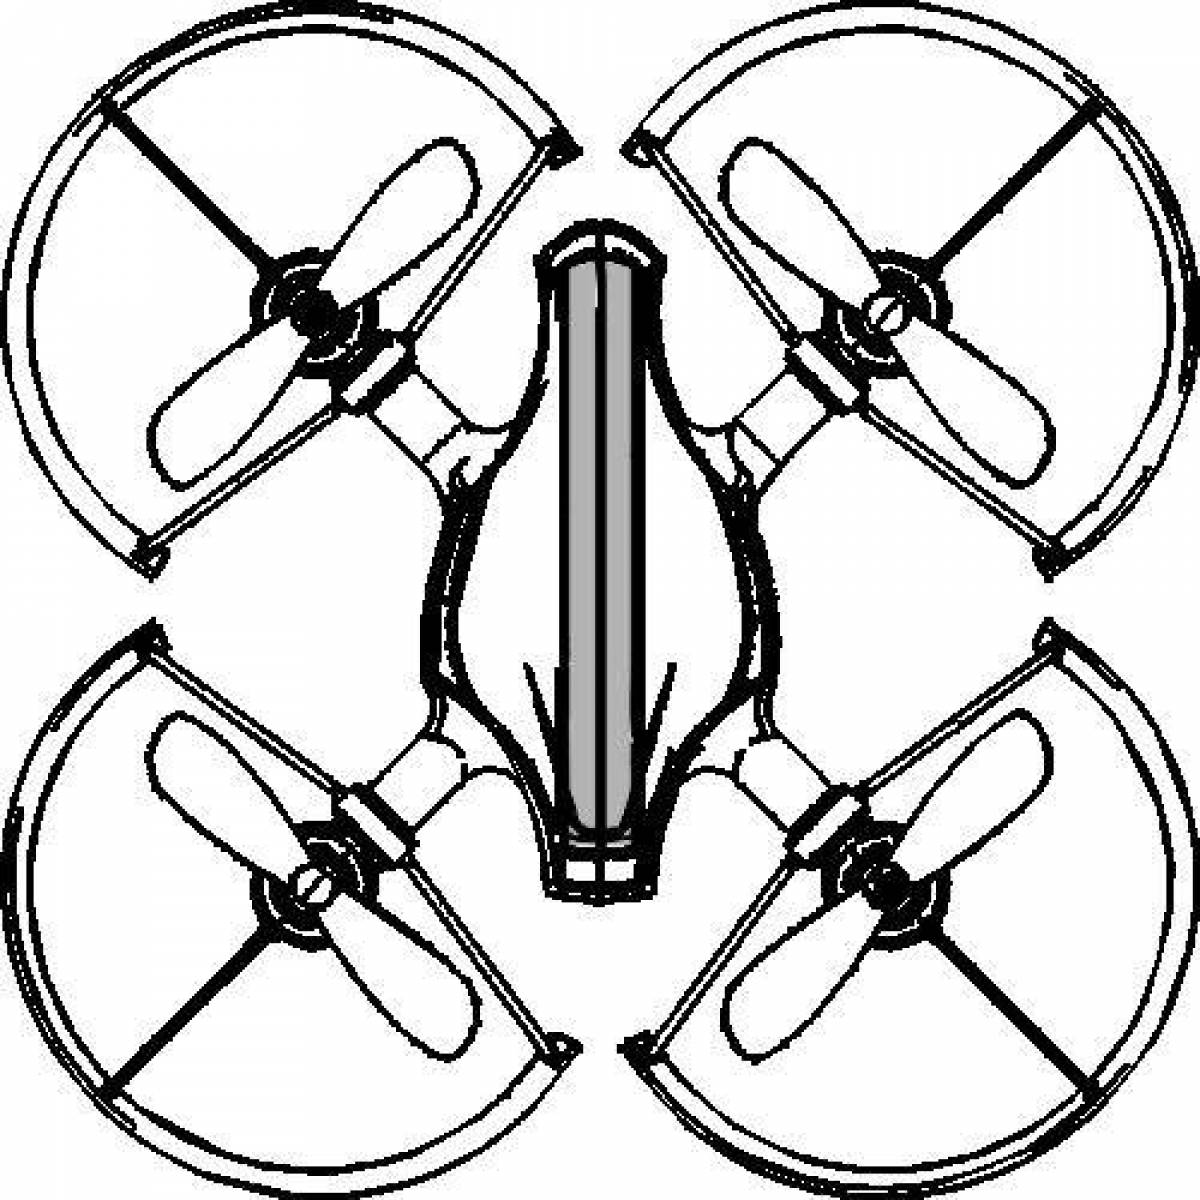 Awesome quadcopter coloring page